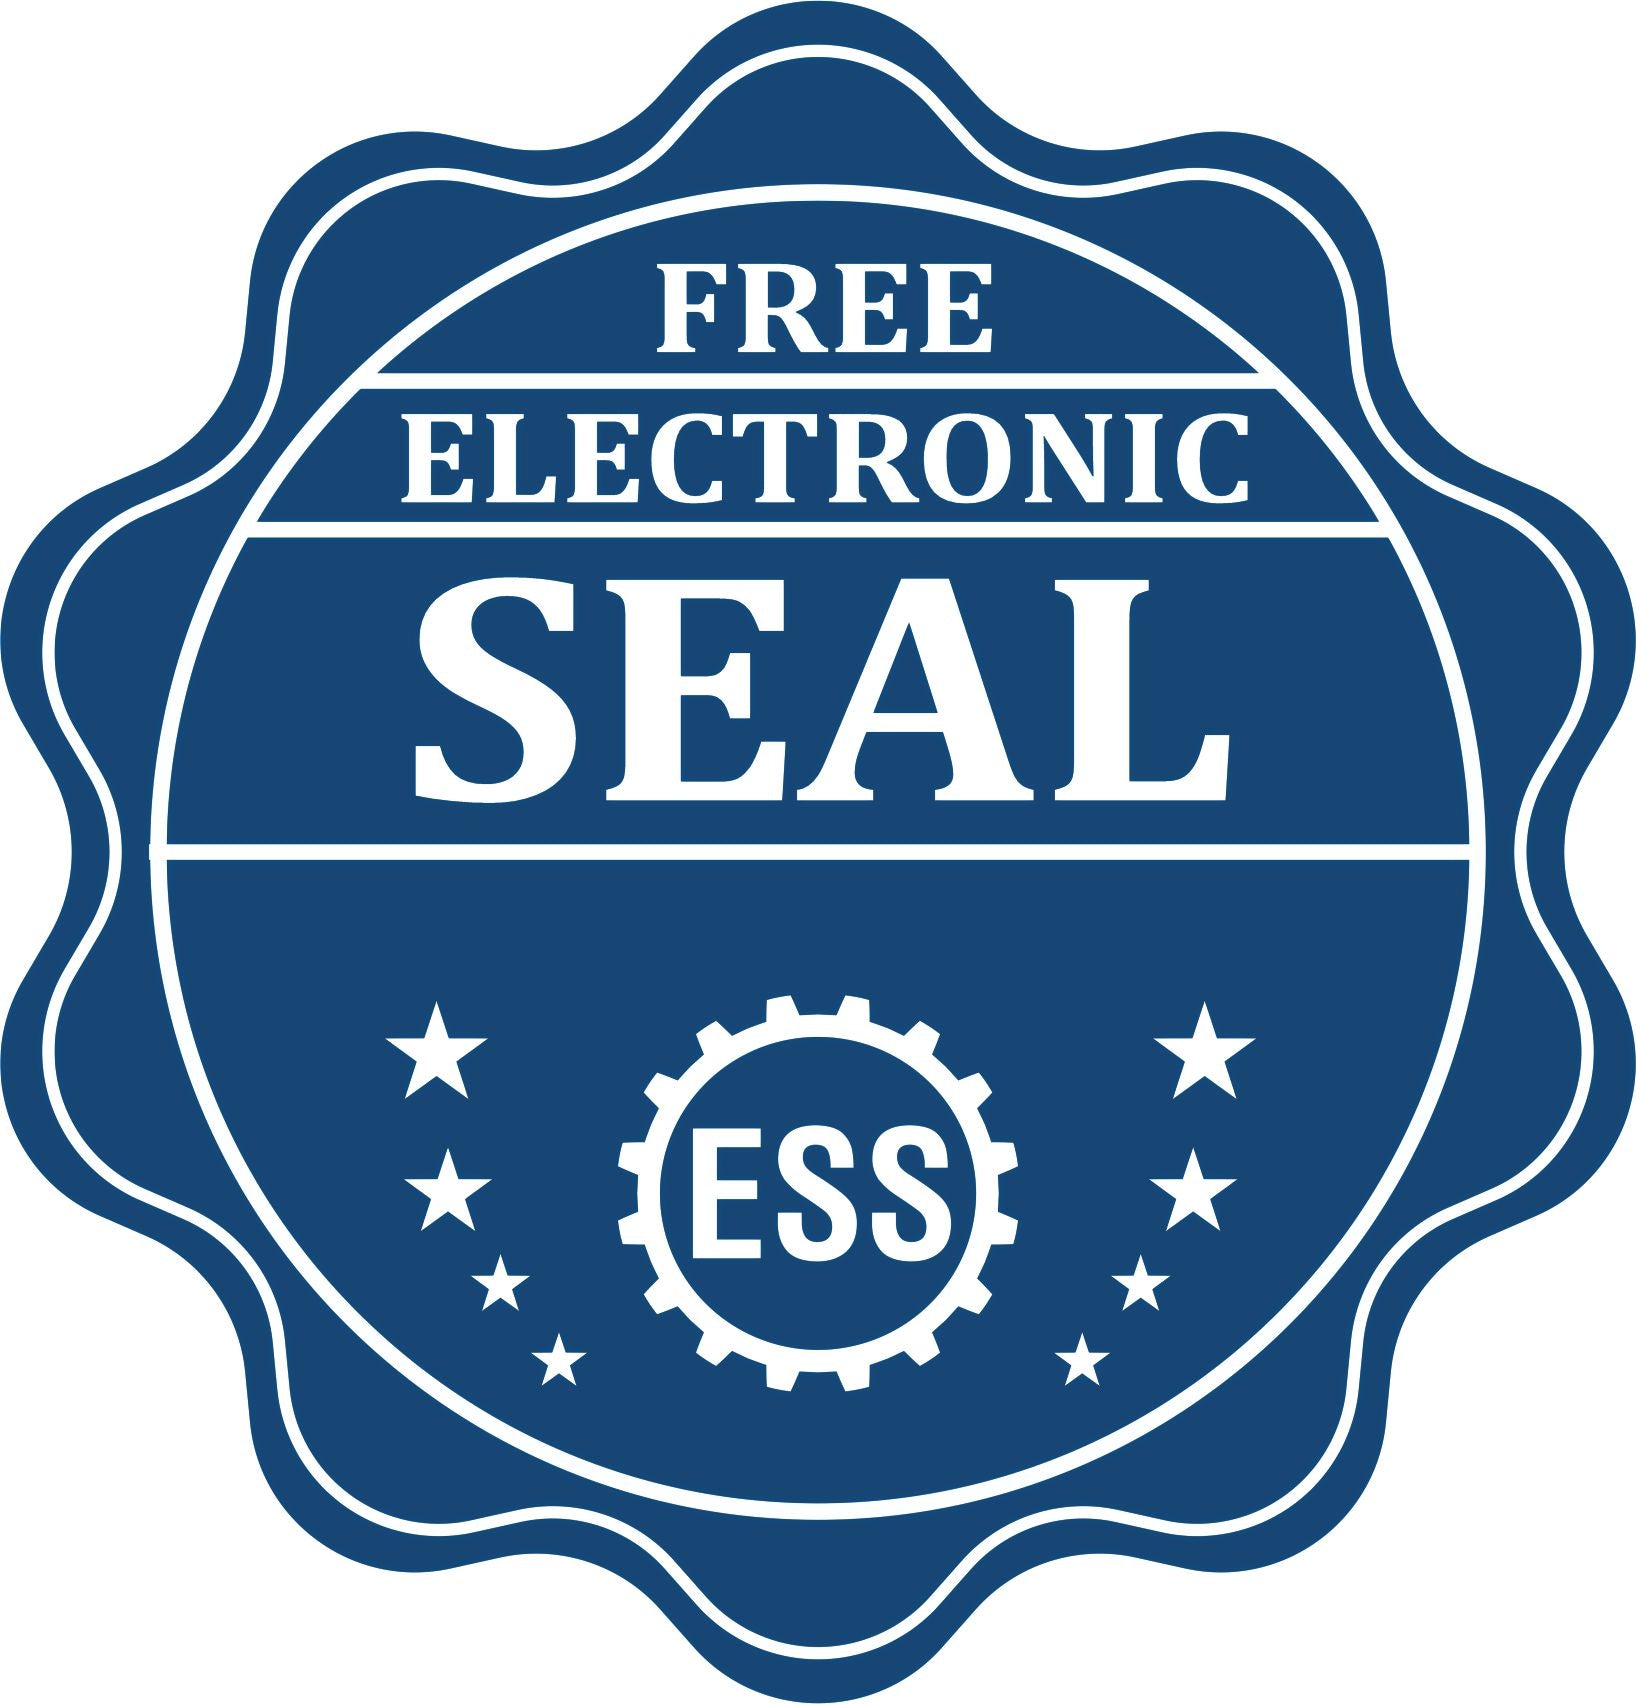 A badge showing a free electronic seal for the Extended Long Reach Delaware Architect Seal Embosser with stars and the ESS gear on the emblem.